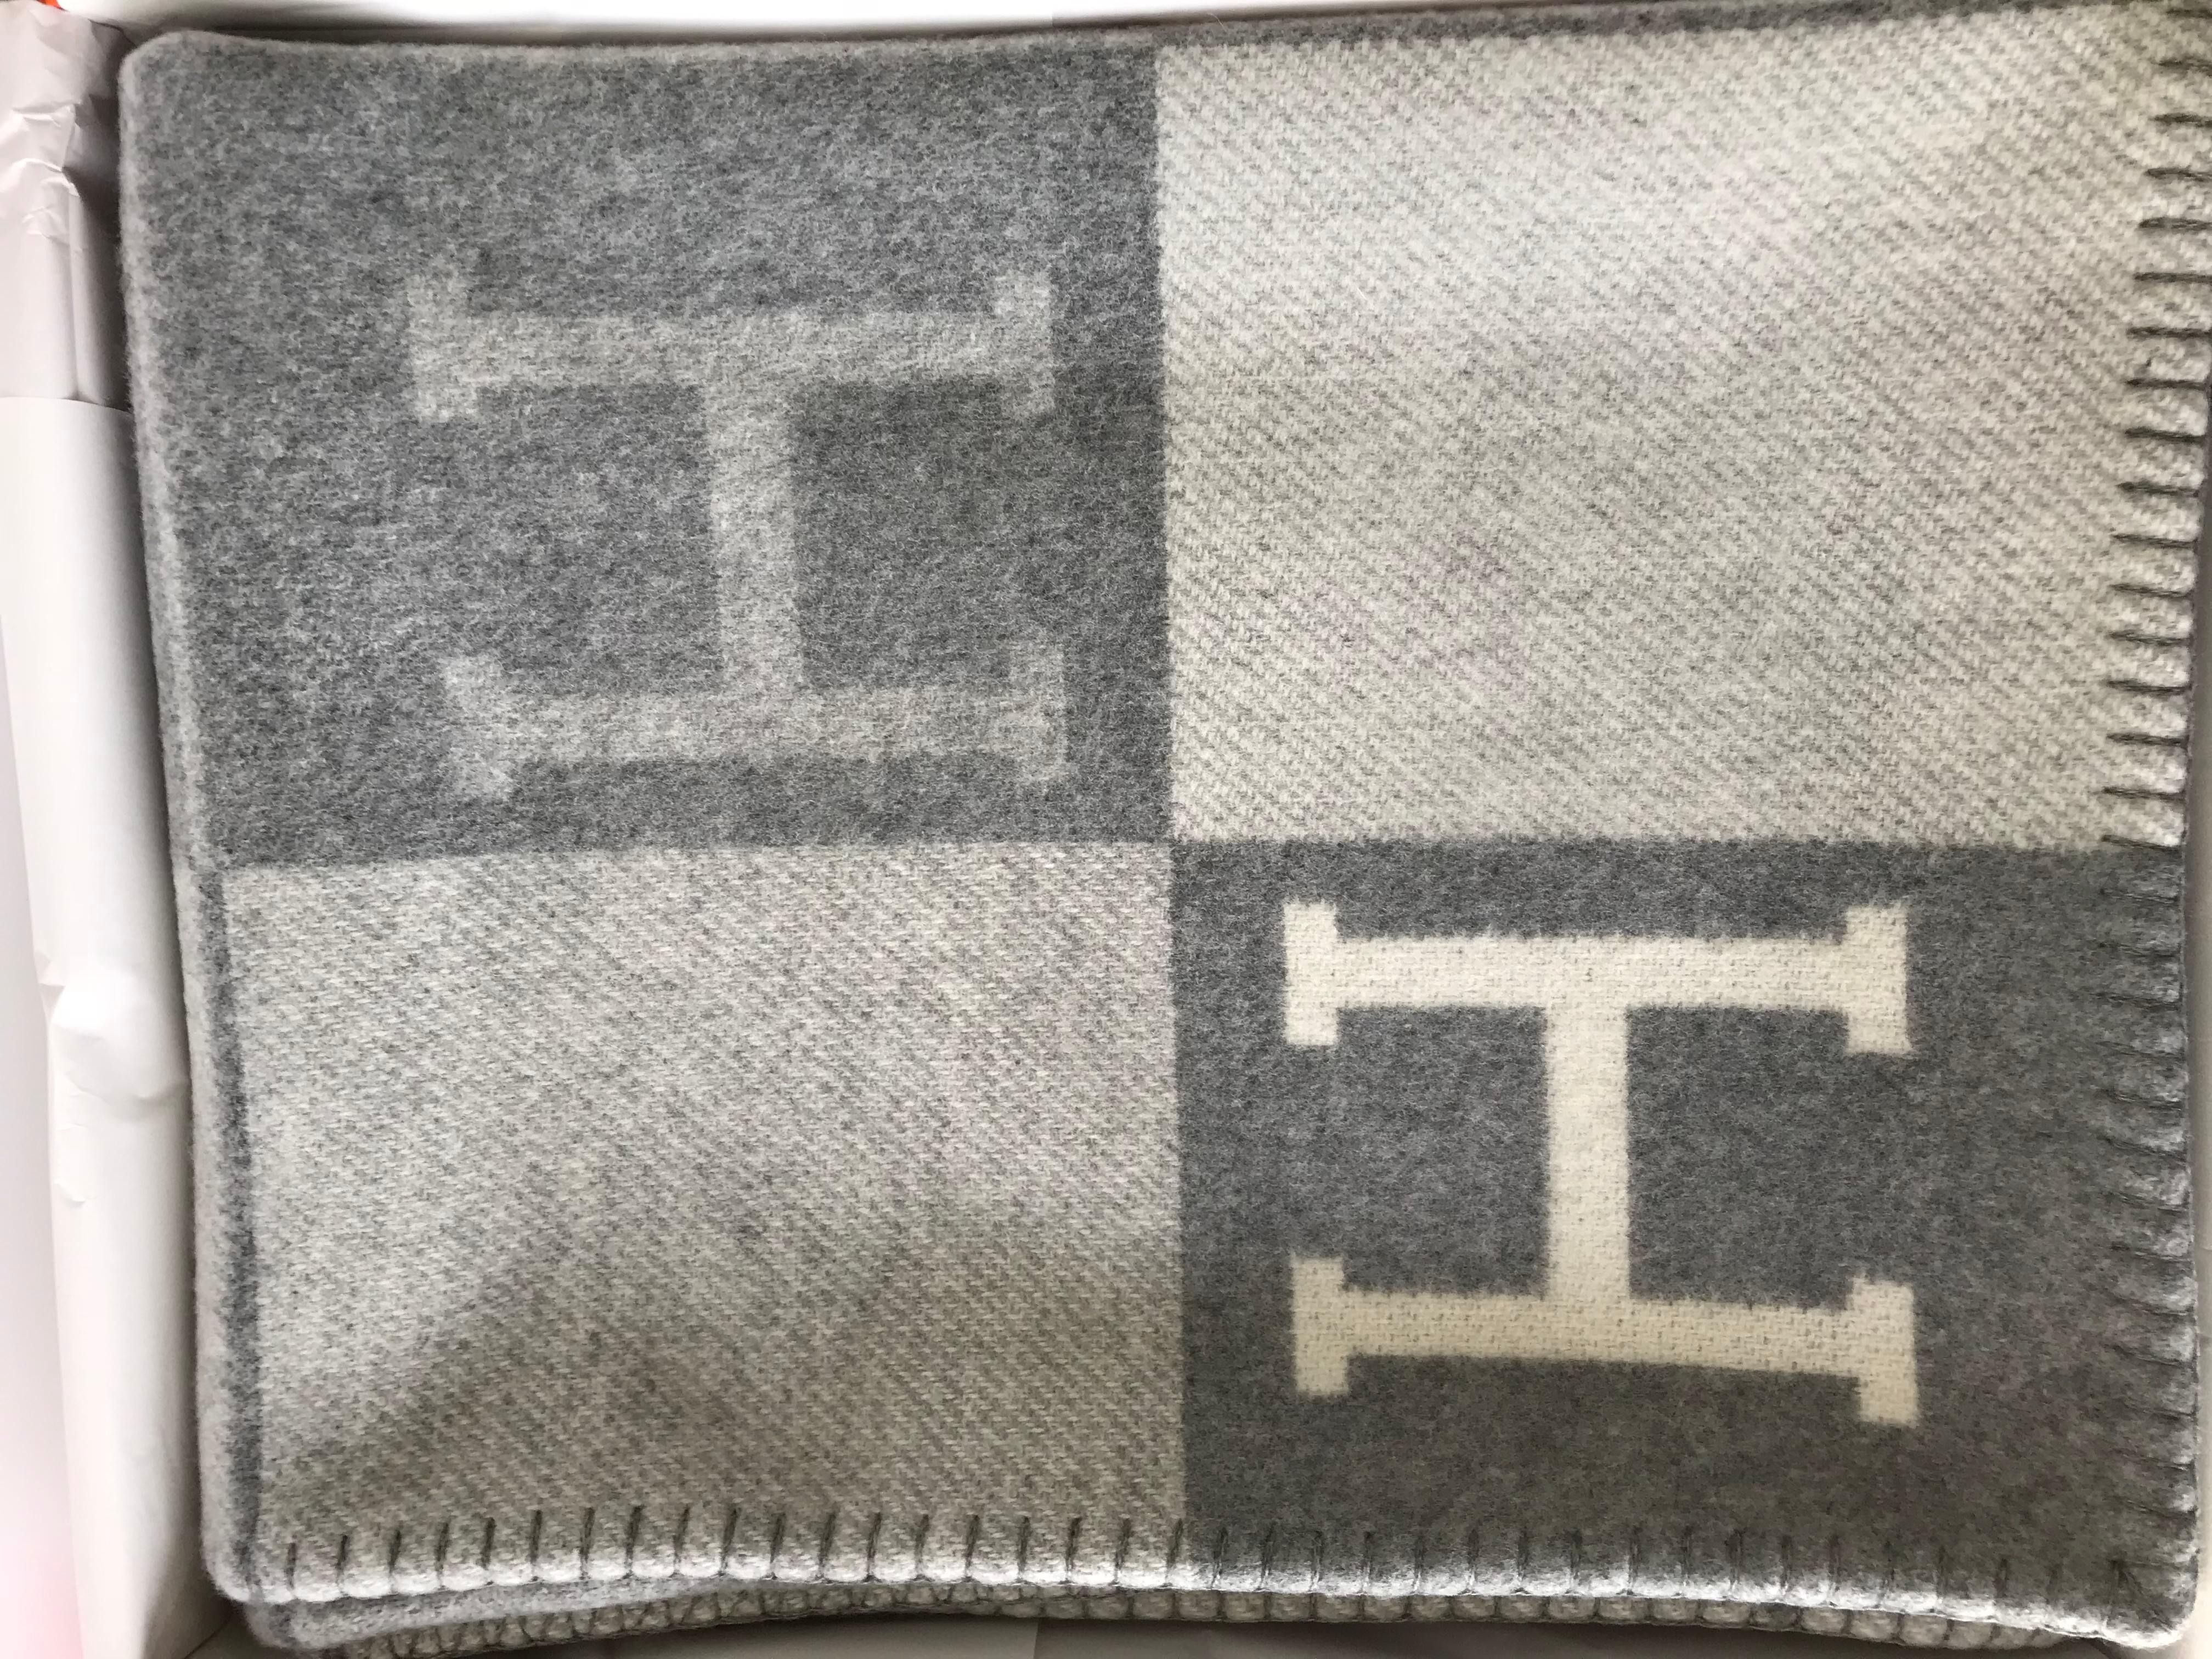 Hermes Avalon III Blanket Throw
Gris Clair and Ecru
Brand New
Taken out for photos only
Hermes throw blanket (90% merino wool, 10% cashmere)
Measures 53